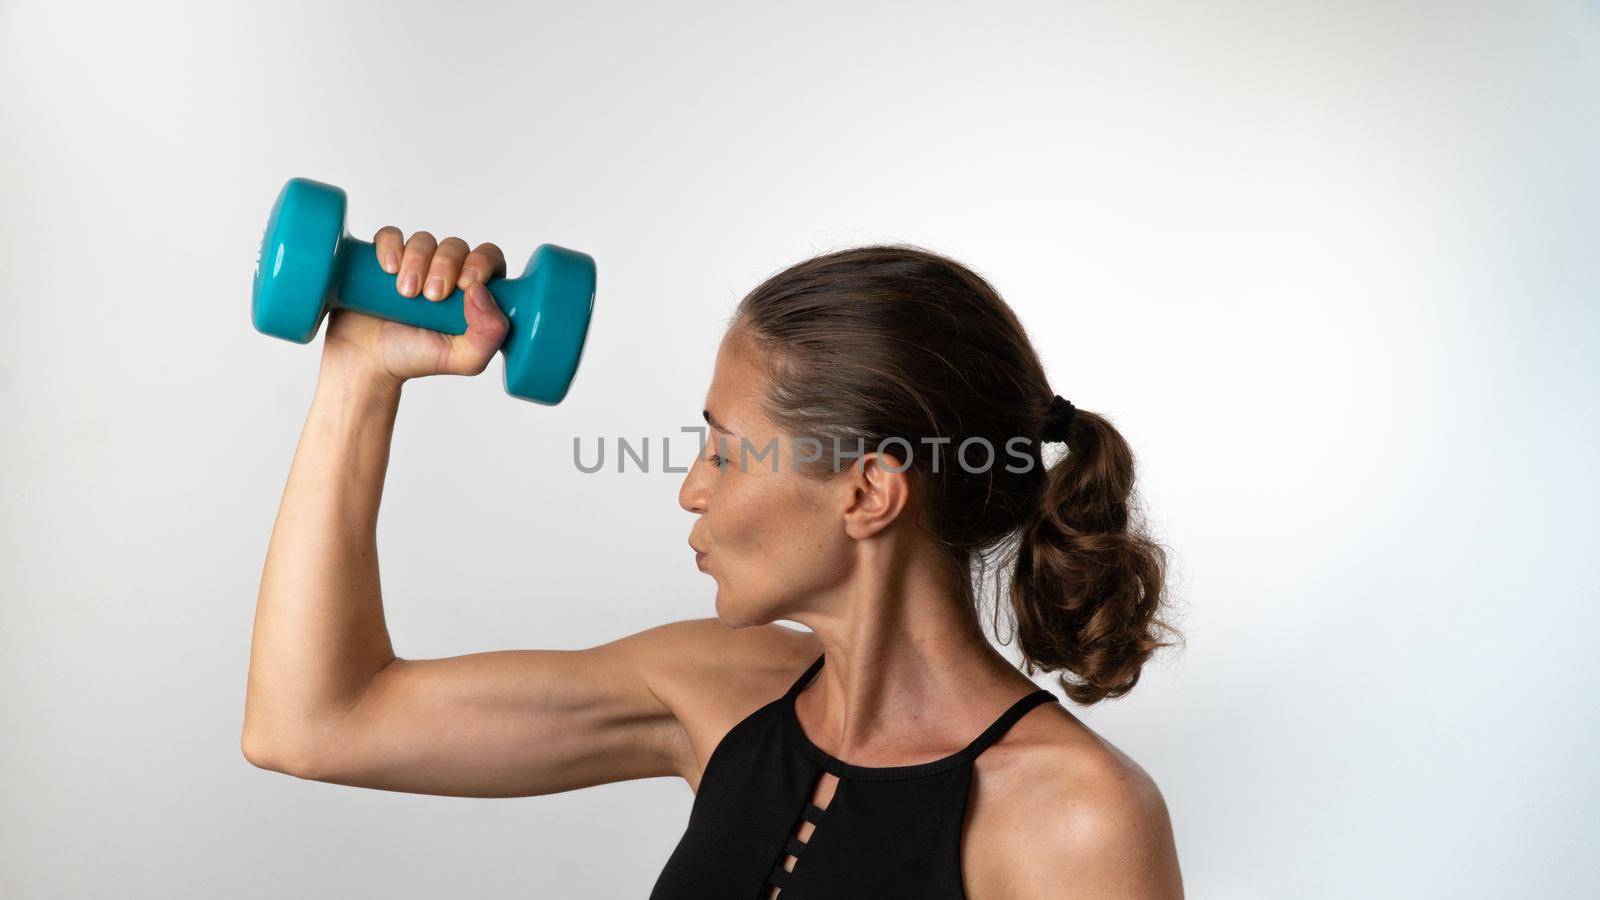 A woman kisses her biceps after a sports workout with a dumbbell in her hands by voktybre